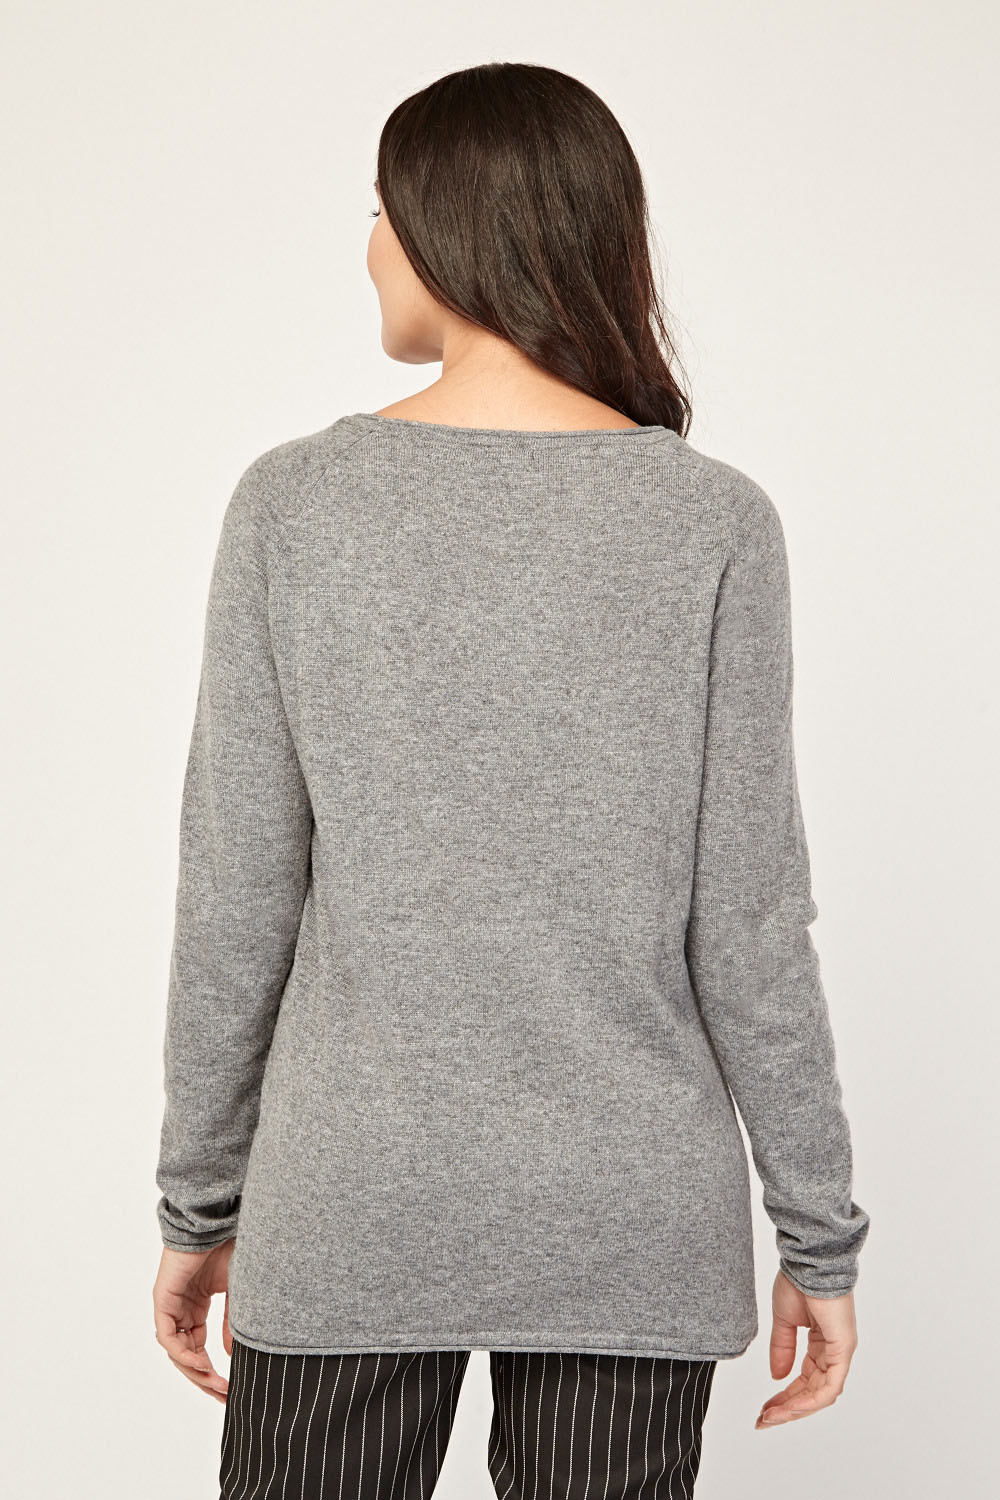 Crew Neck Sheer Knit Top - Just $7